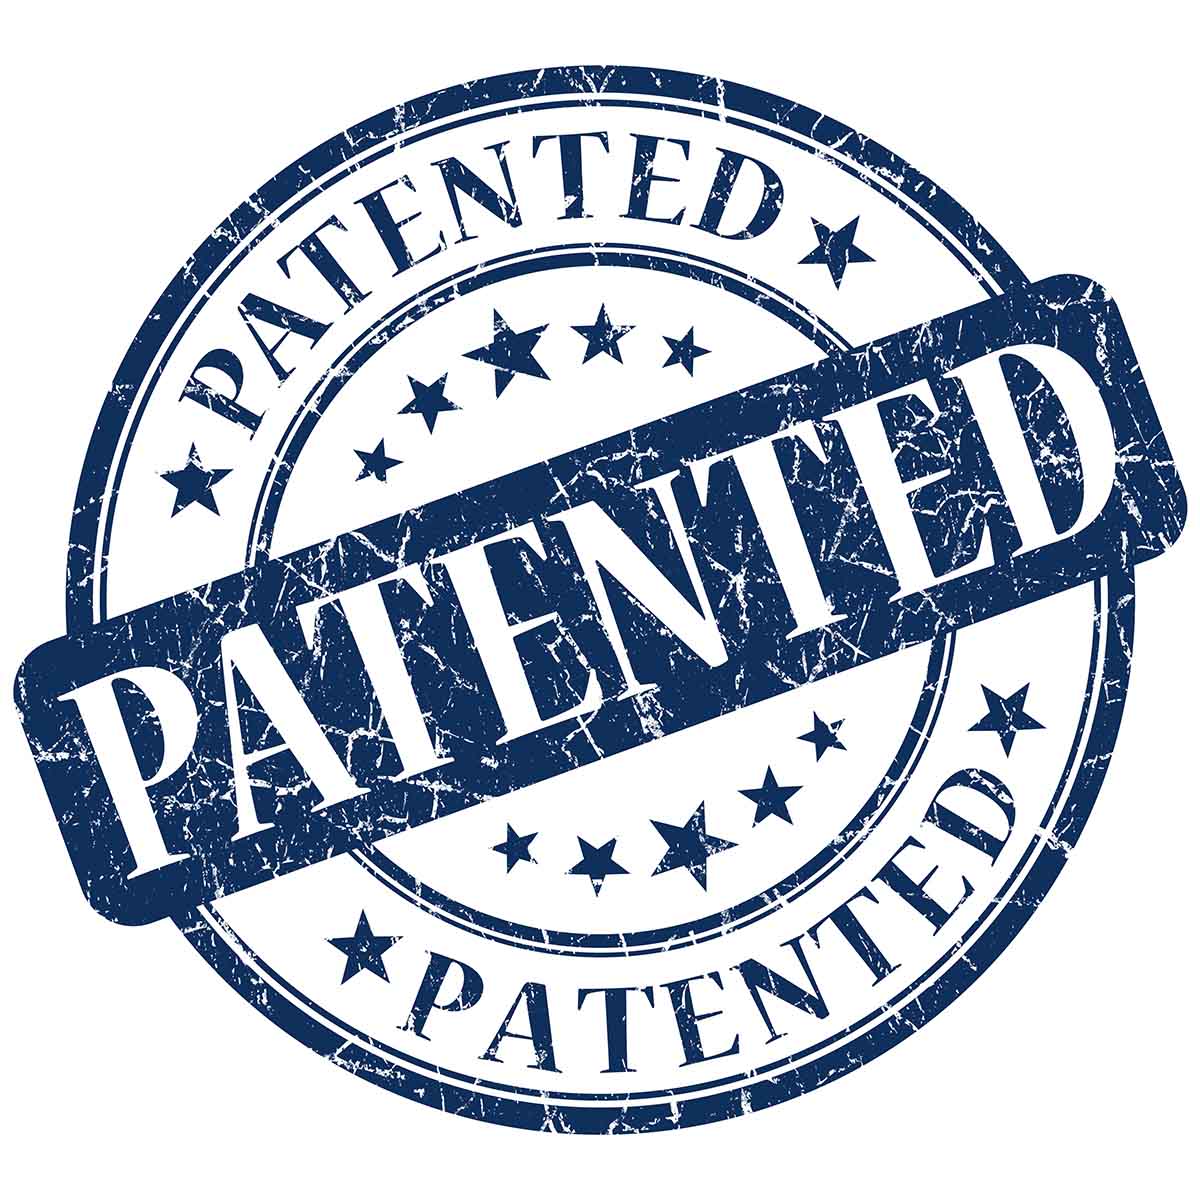 How To Conduct A Proper Patent Search